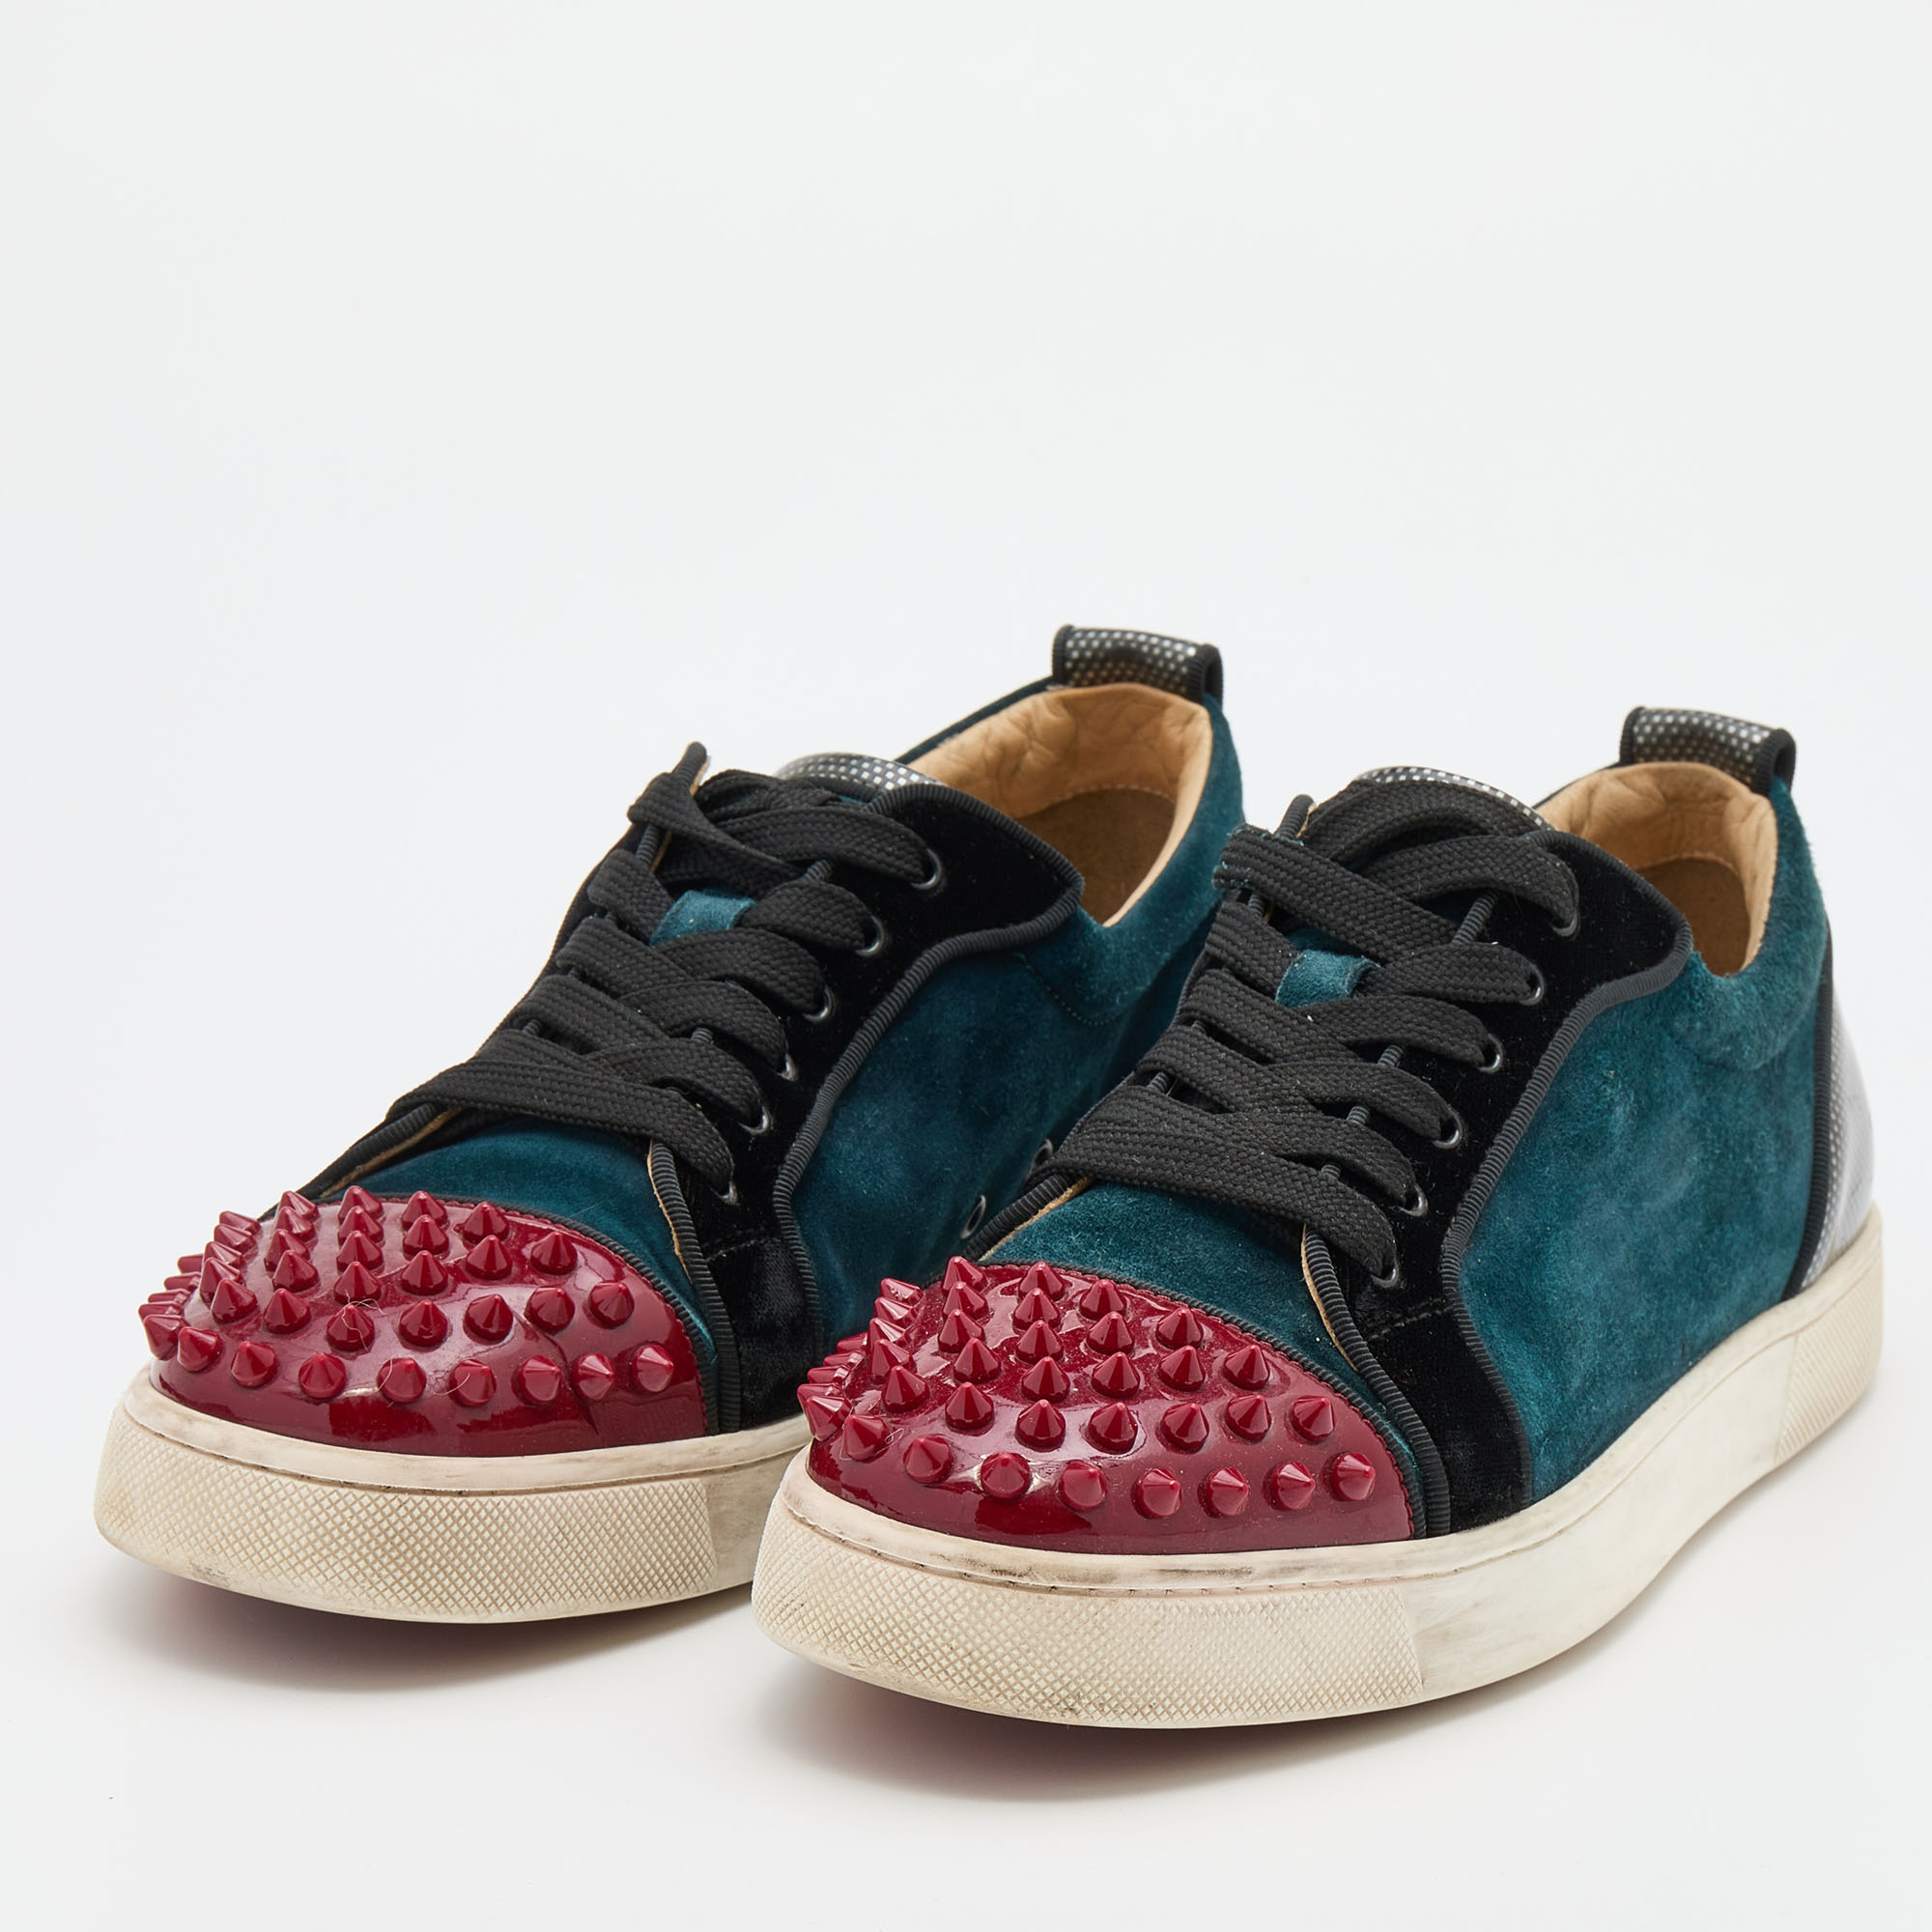 

Christian Louboutin Multicolor Patent Leather and Suede Spike Accent Low Top Sneakers Size